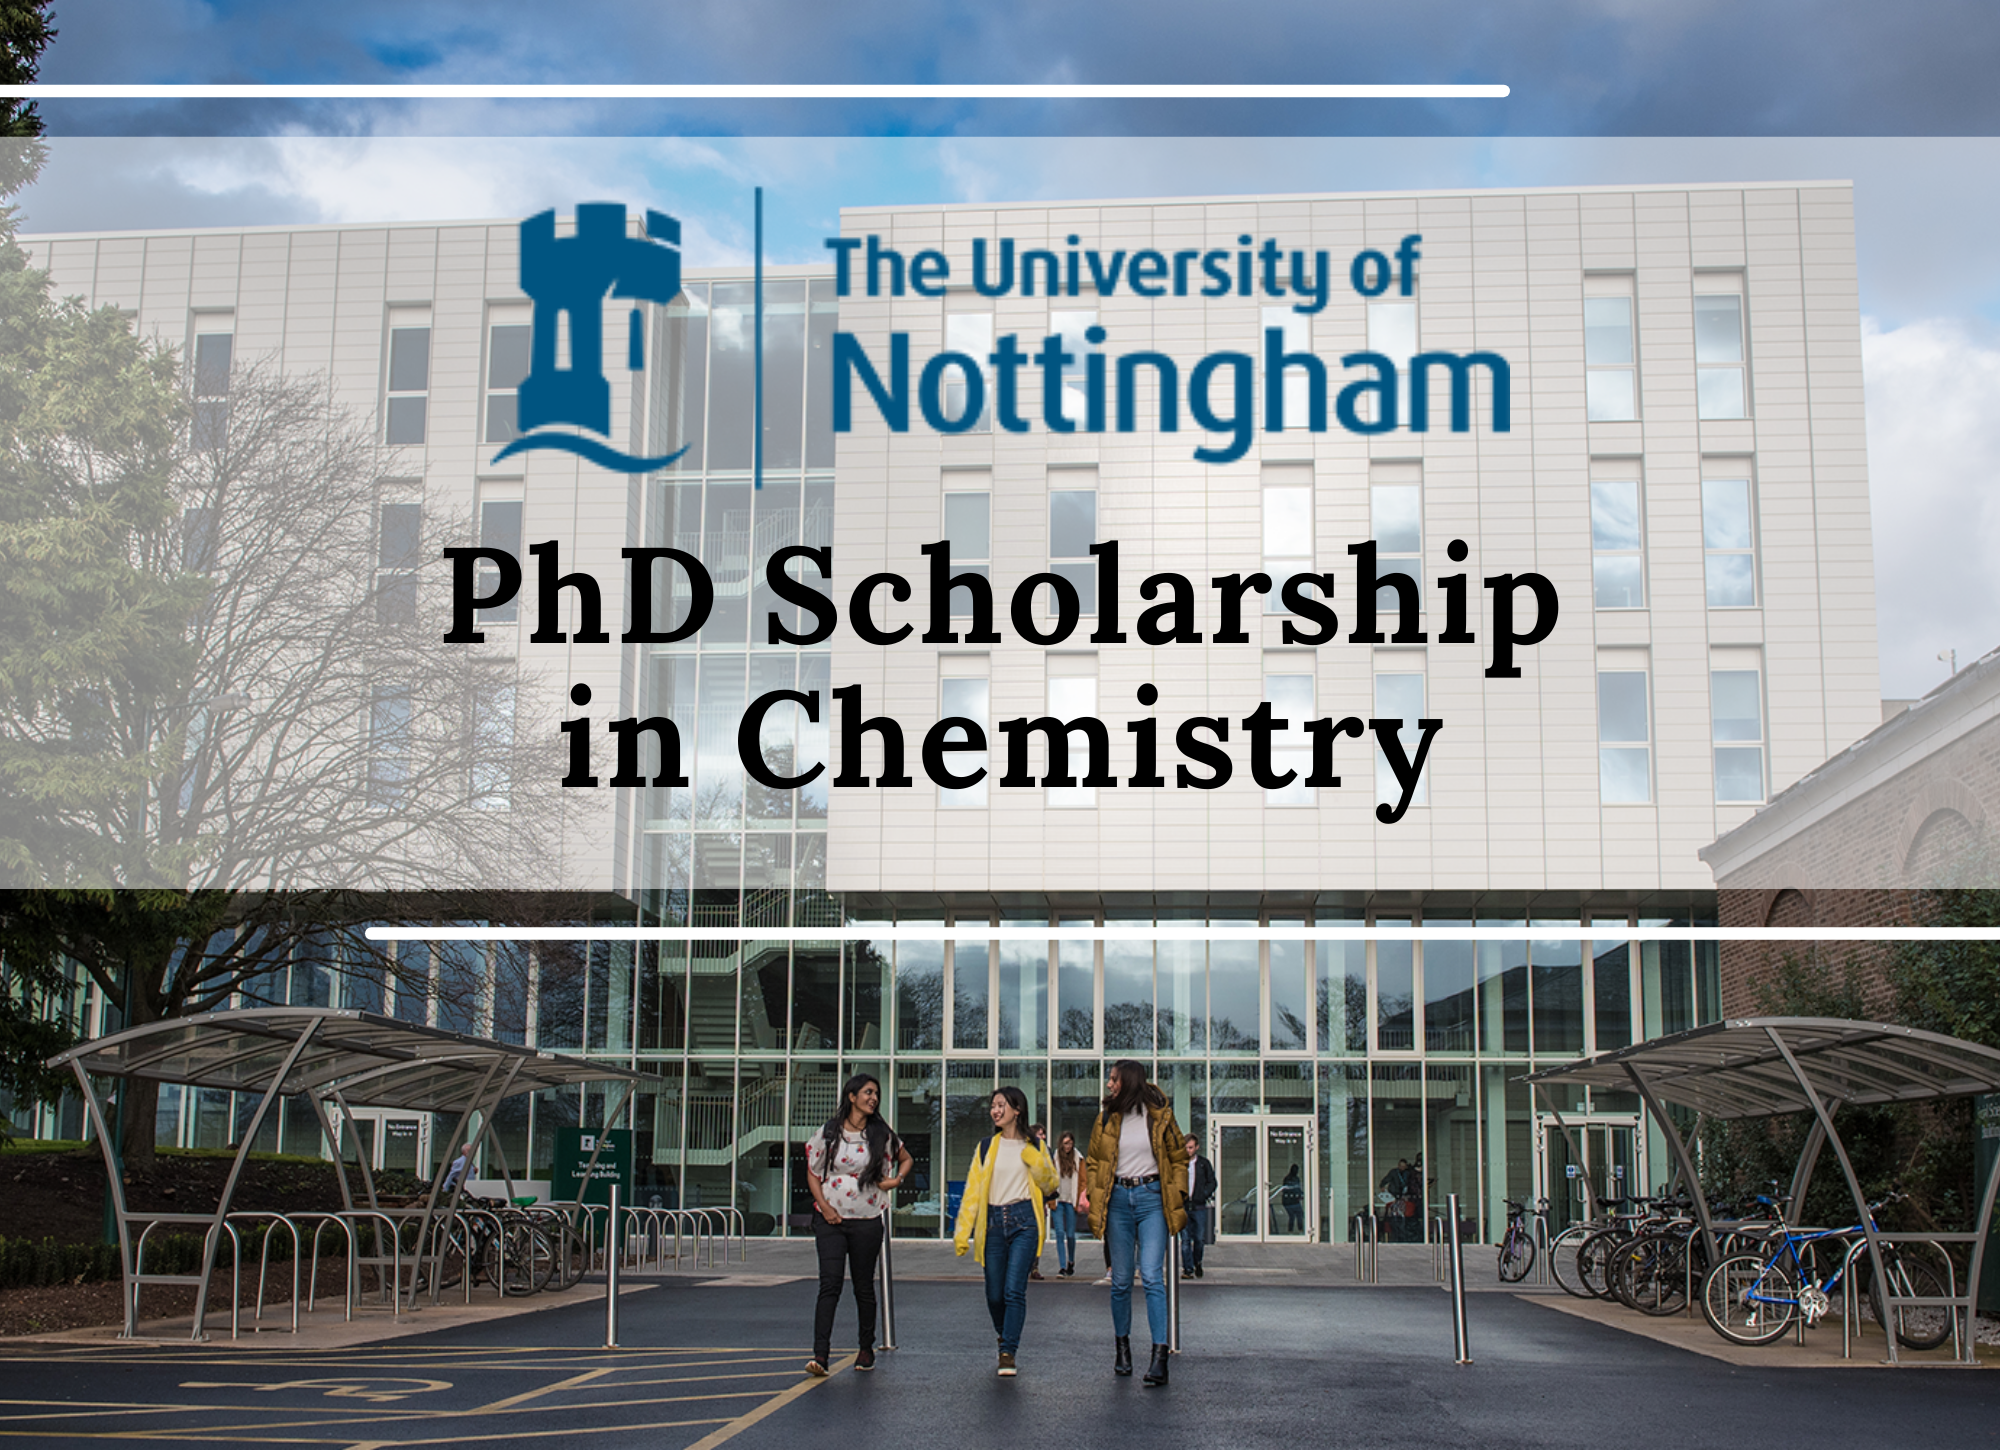 PhD Studentship in Chemistry at the University of Nottingham